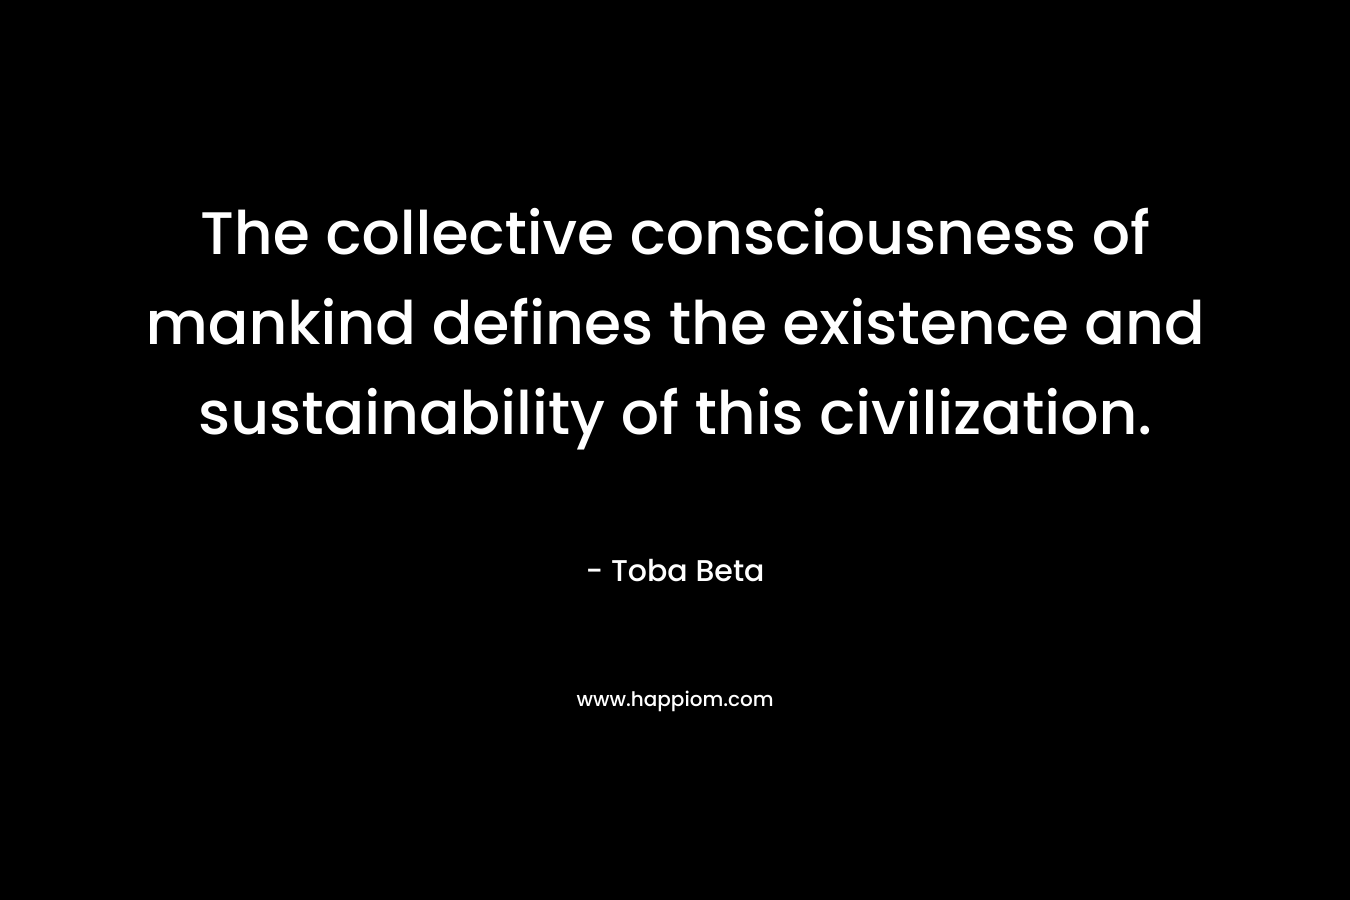 The collective consciousness of mankind defines the existence and sustainability of this civilization.